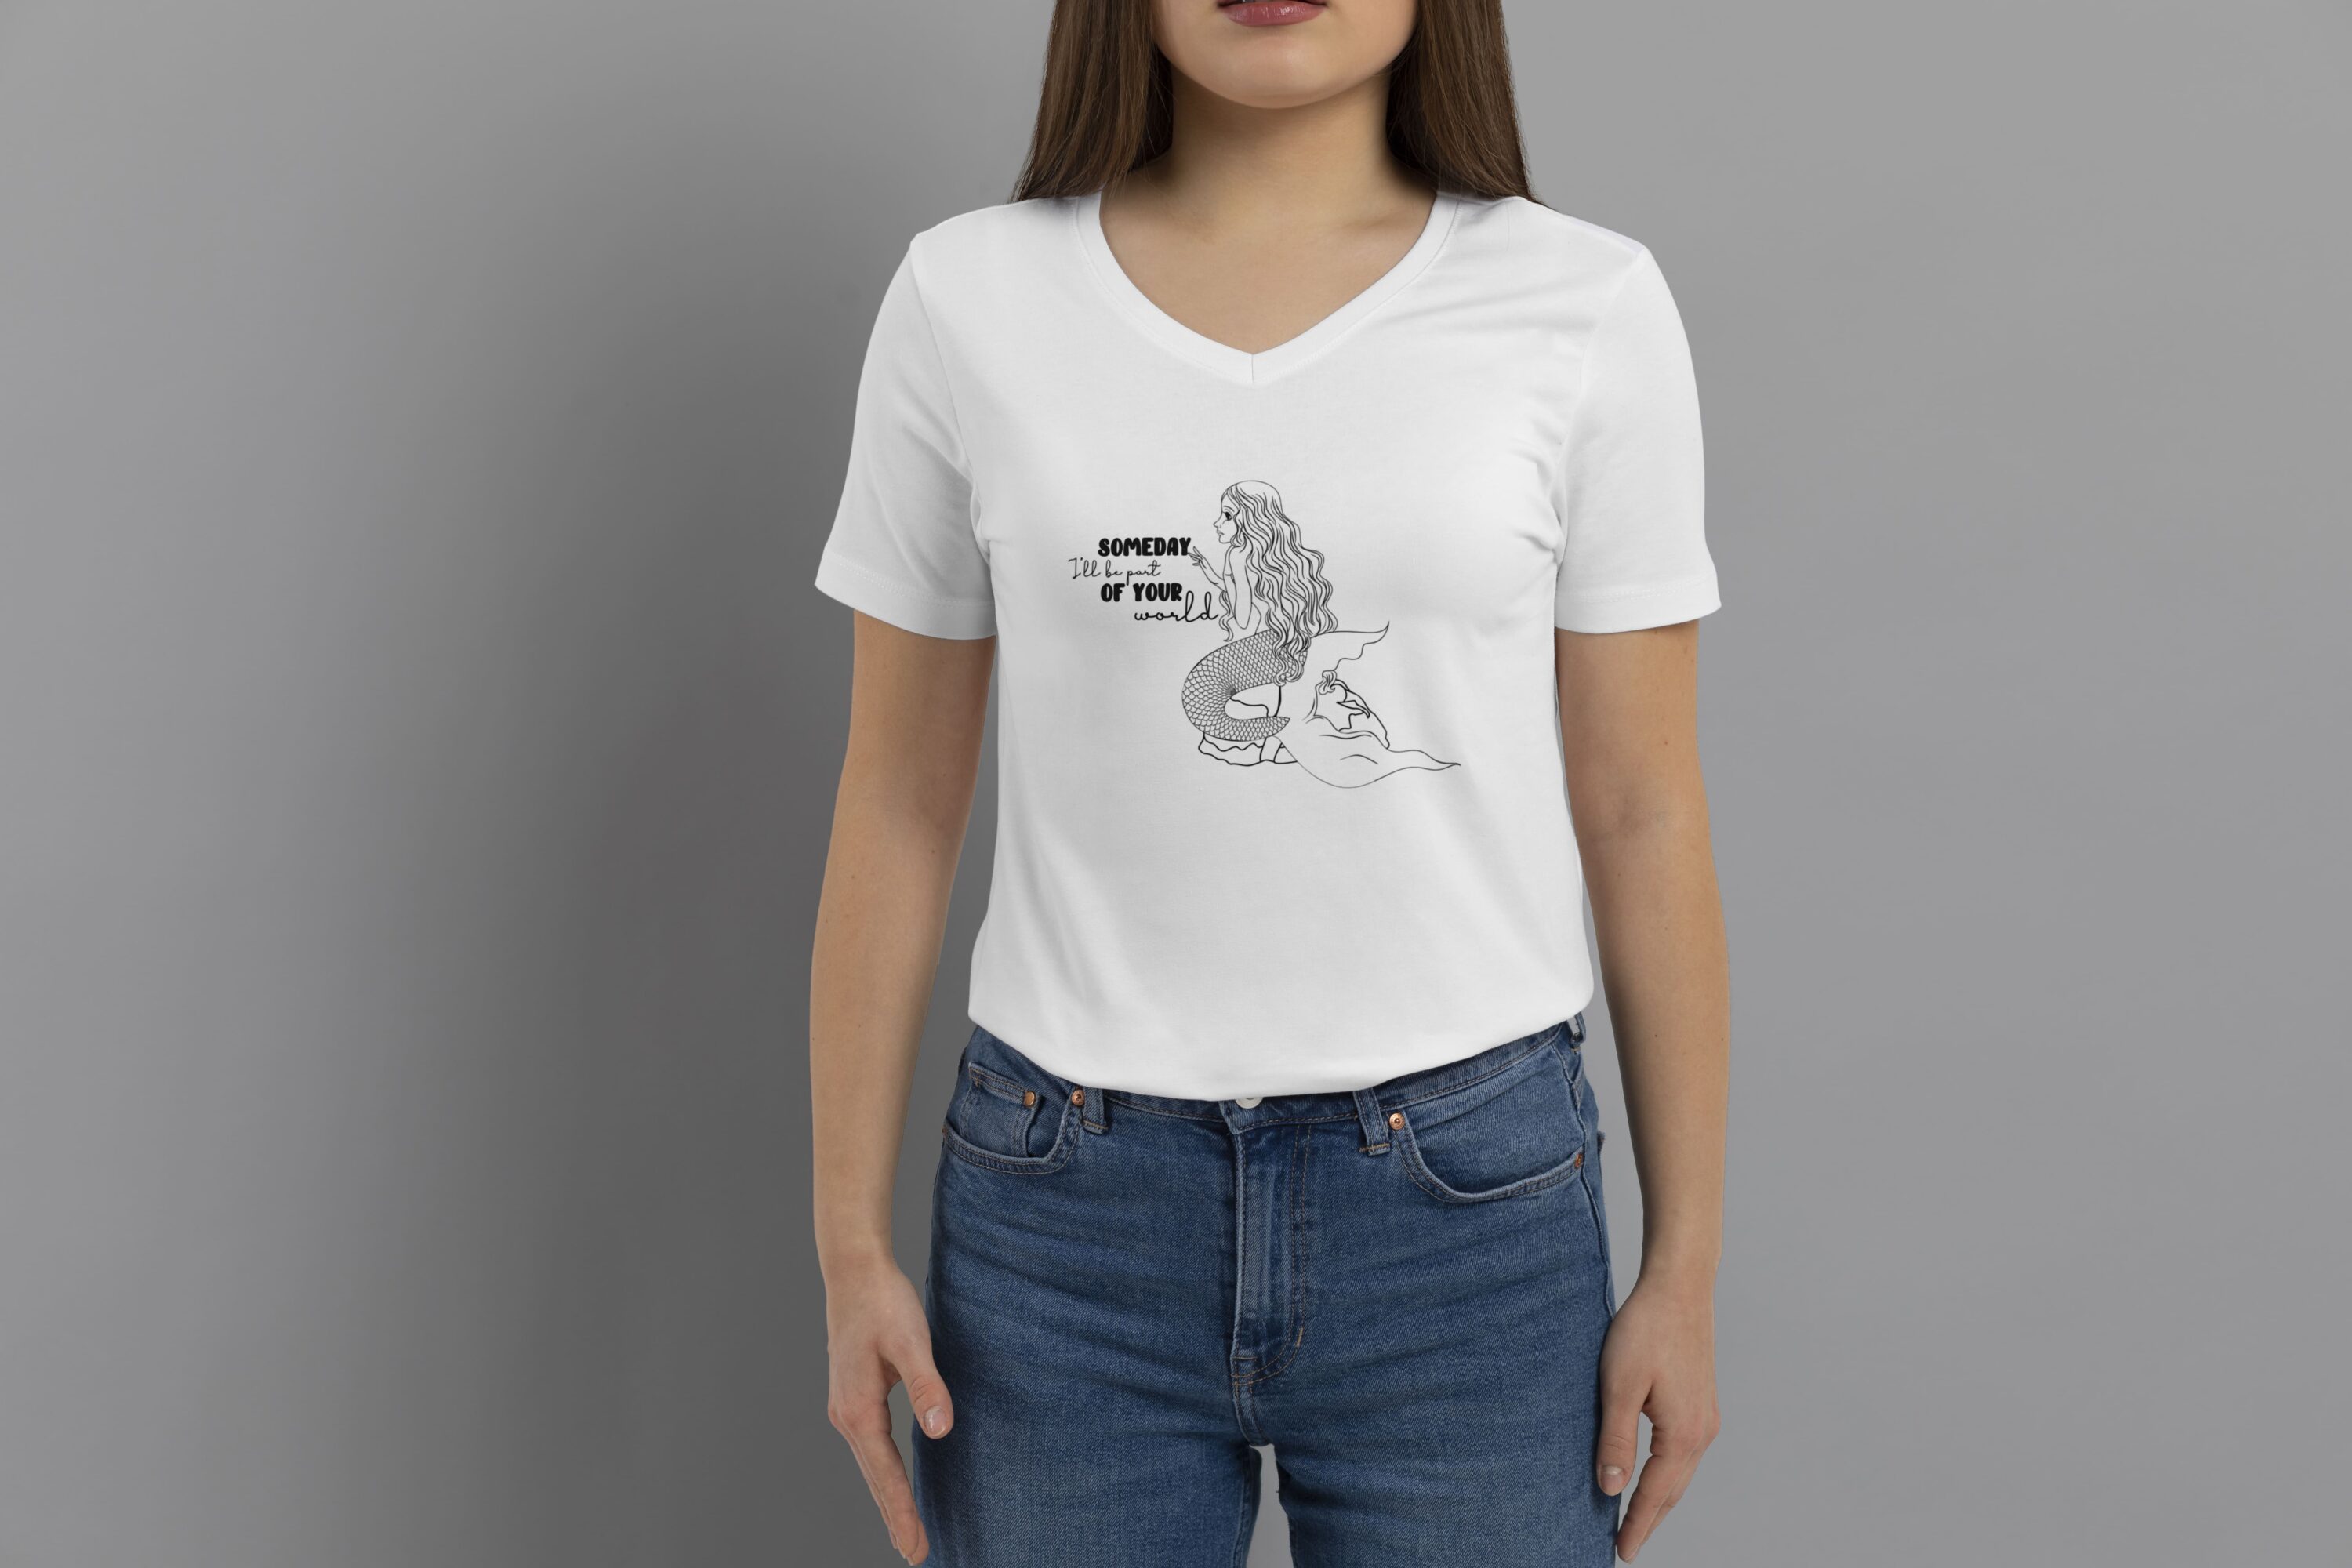 Model girl with a mermaid print on a t-shirt.